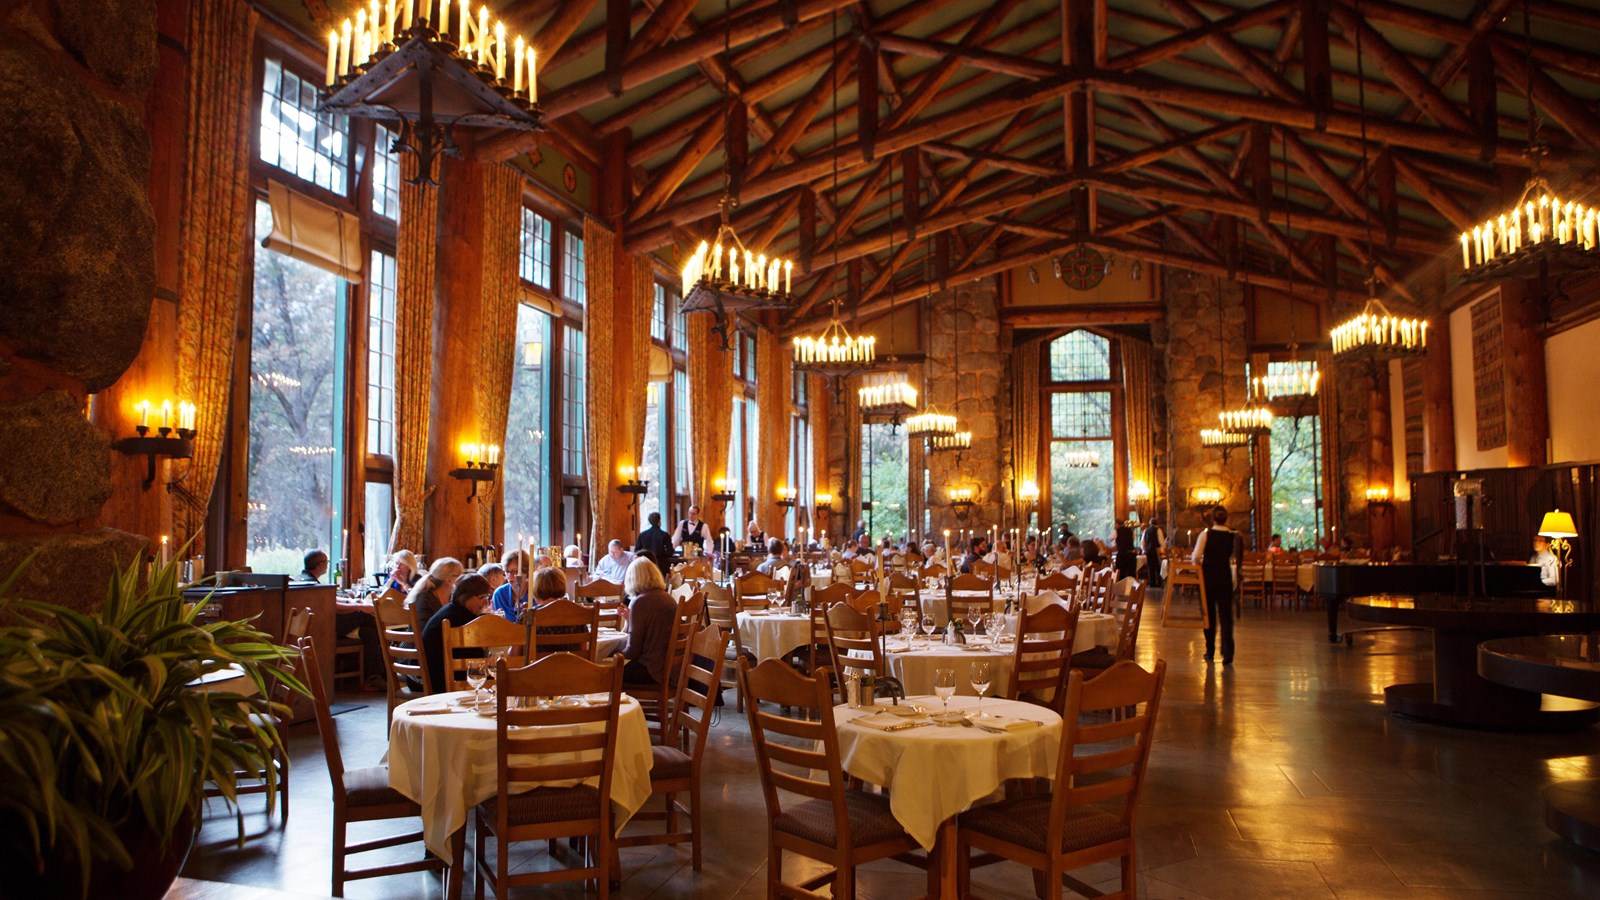 Tables and people dining in the dining room at The Ahwahnee